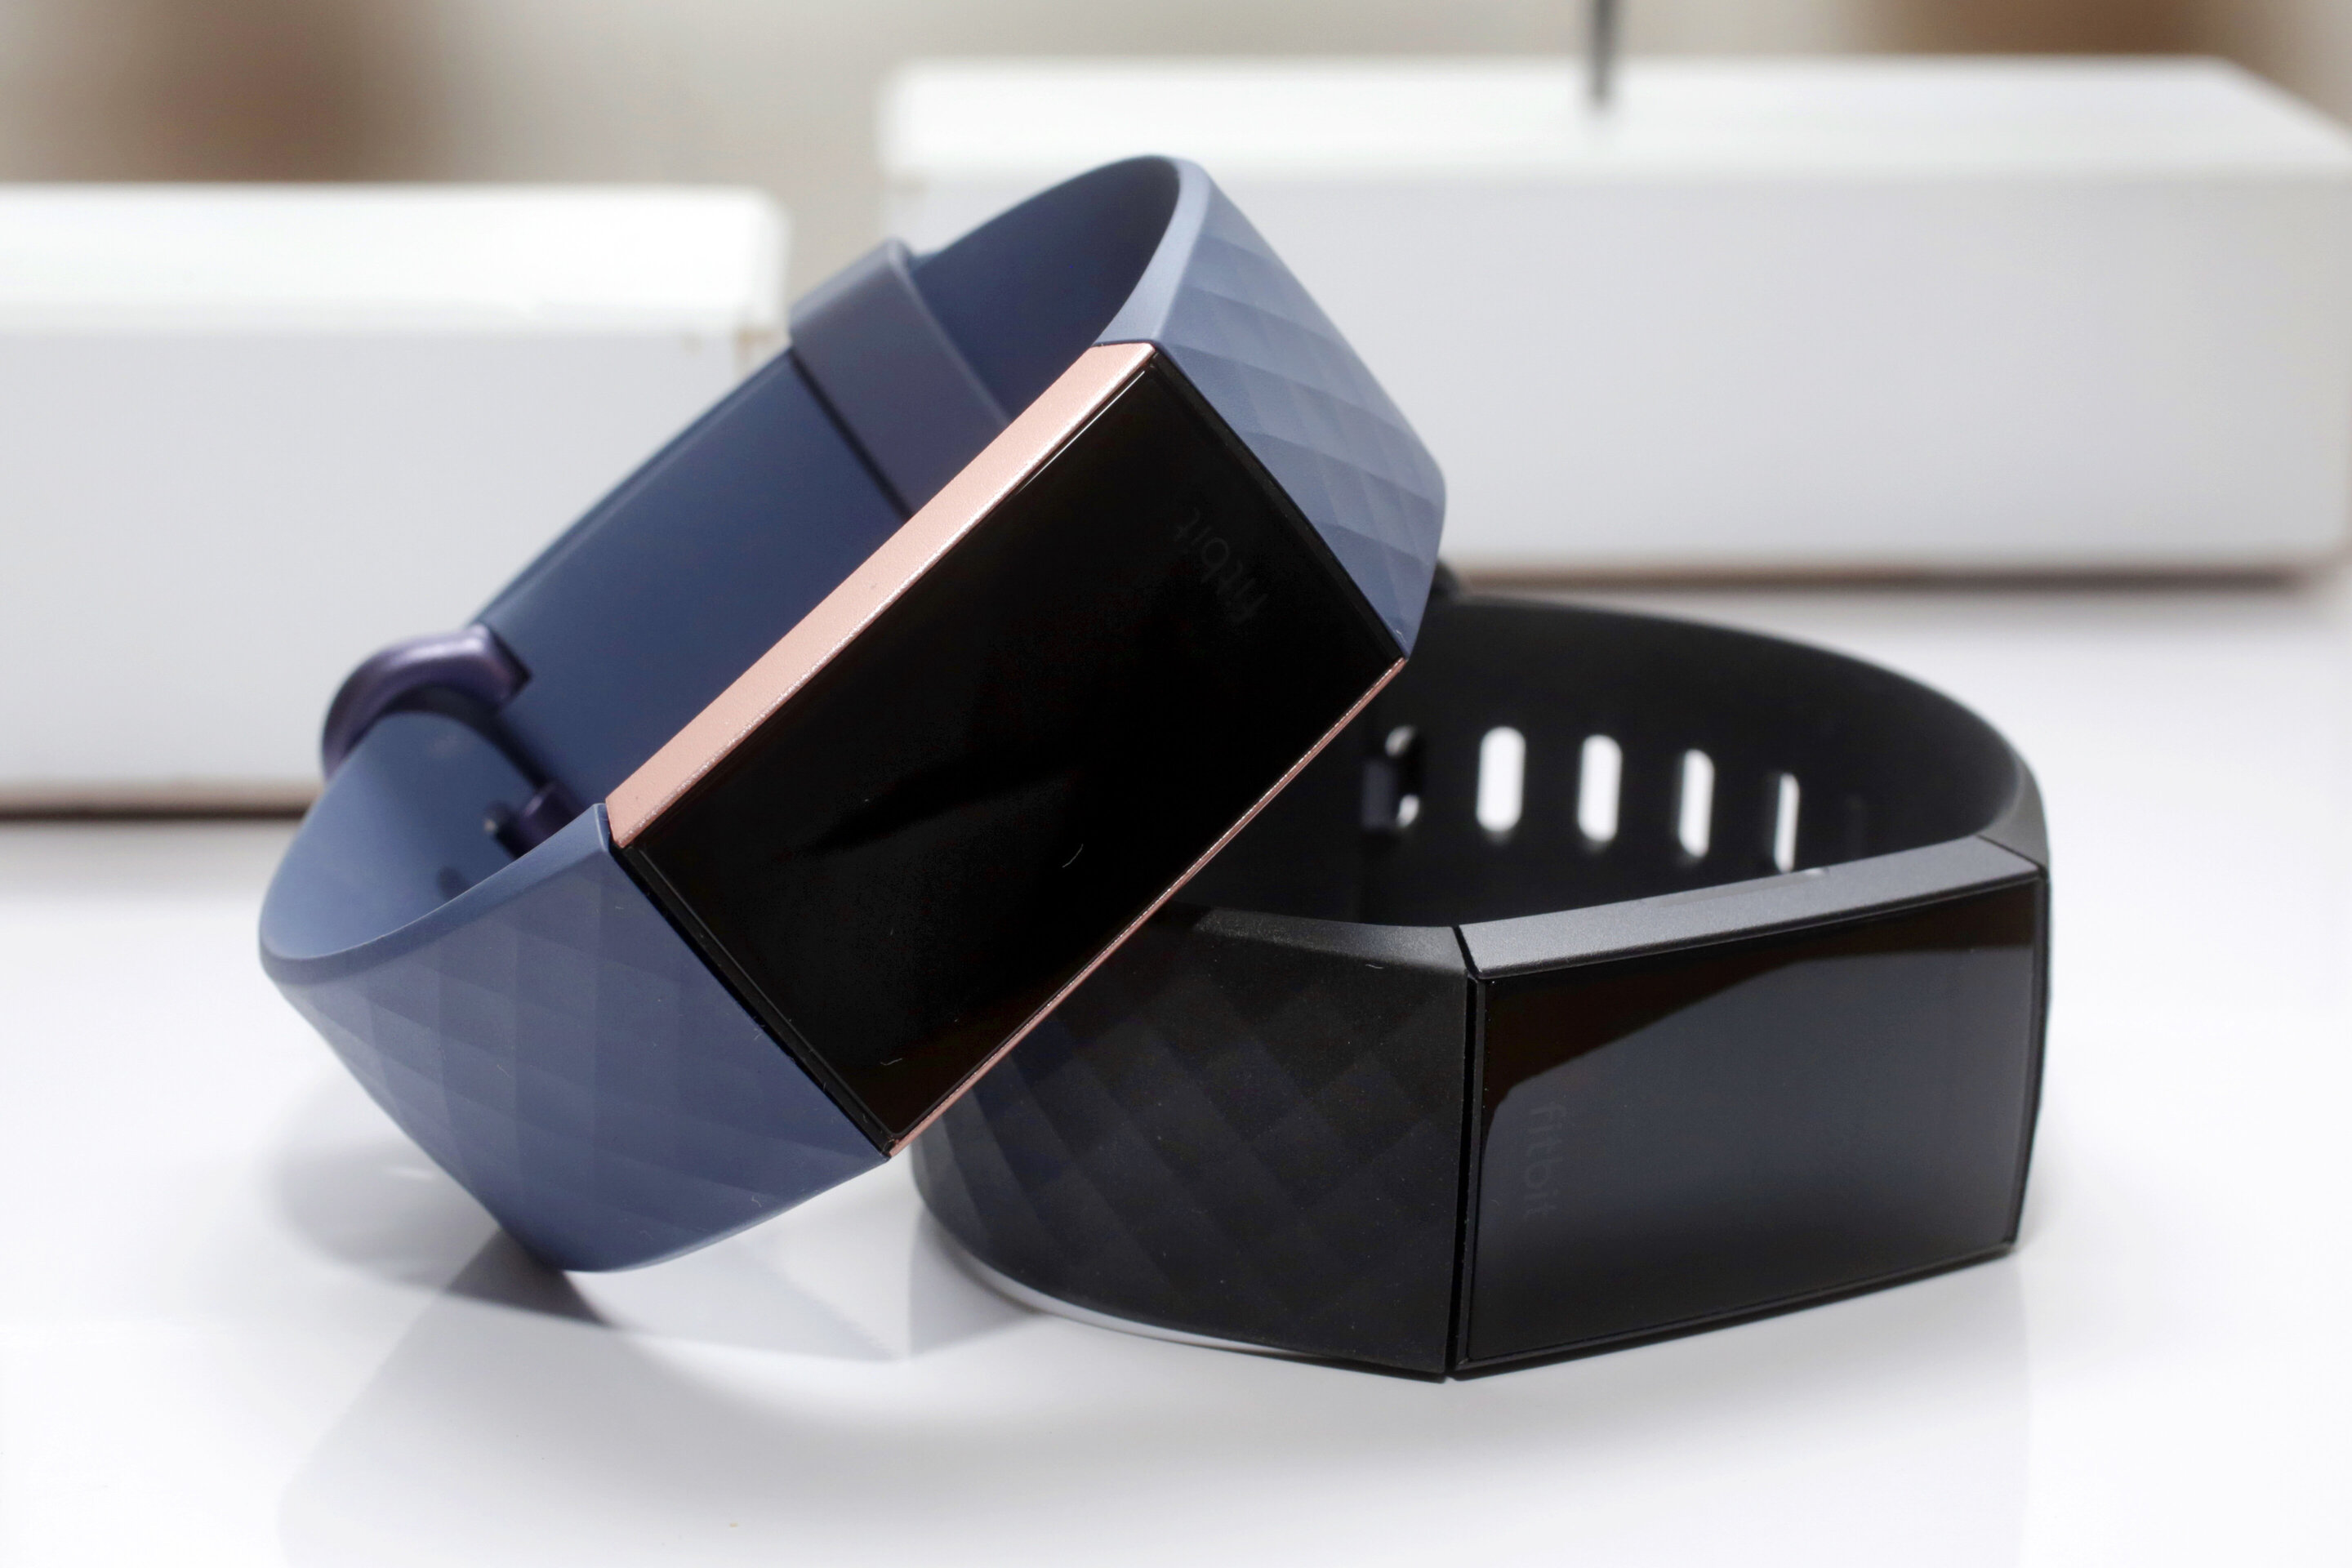 Google buys Fitbit for stepping back into wearables